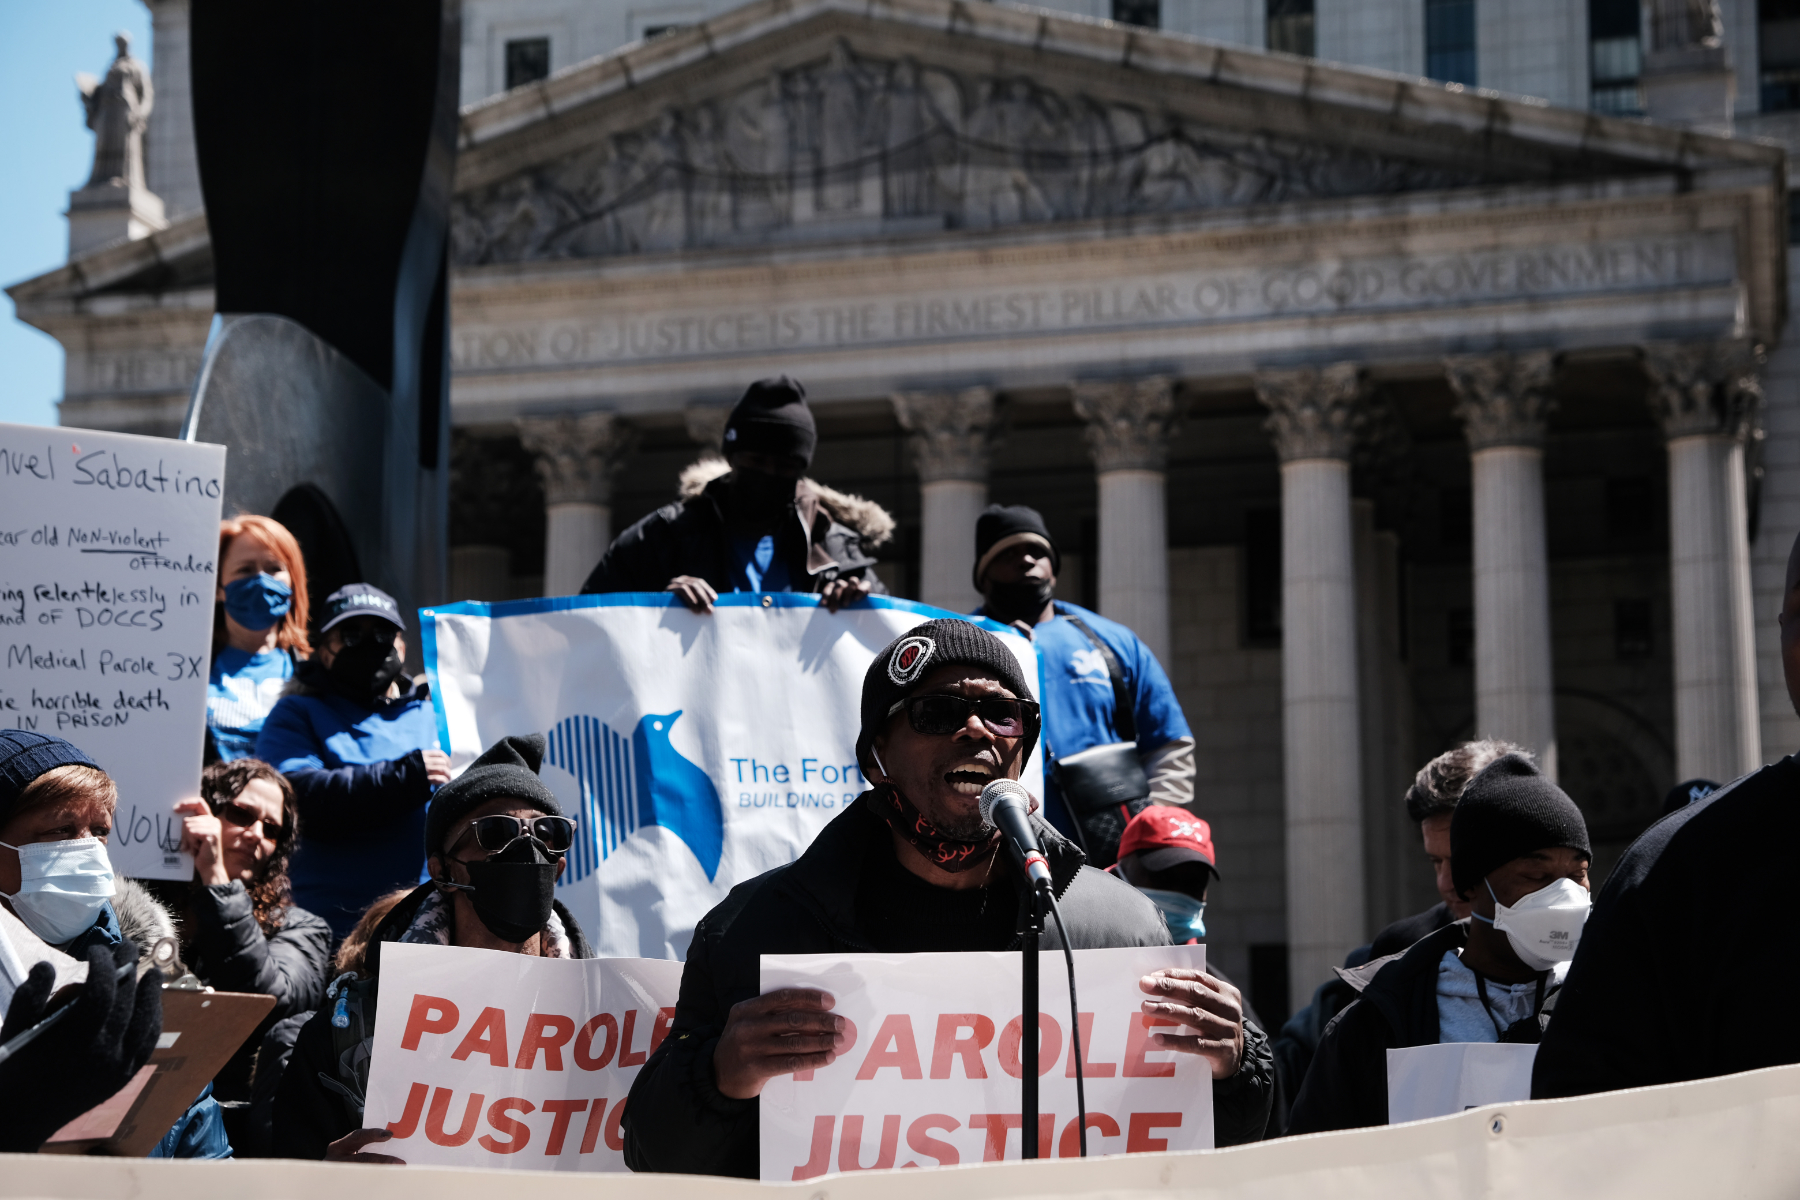 Formerly incarcerated New Yorkers, faith leaders and activists held an outdoor rally in Albany, N.Y. to launch a post-budget effort to pass parole reforms in New York State.